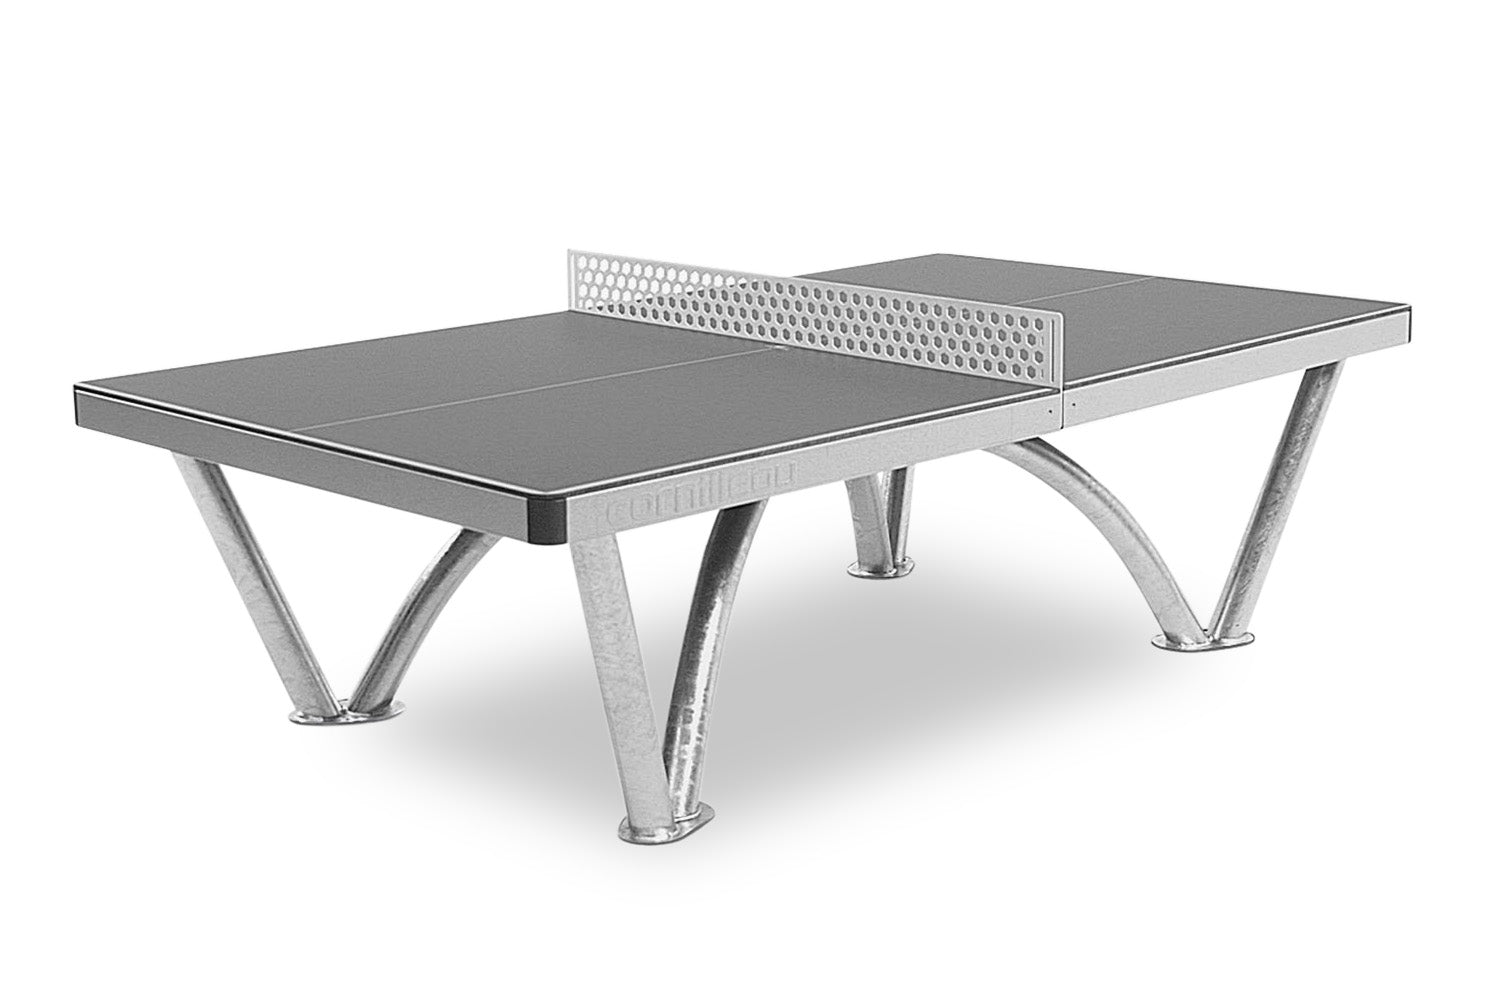 Cornilleau 100 indoor ping pong table 